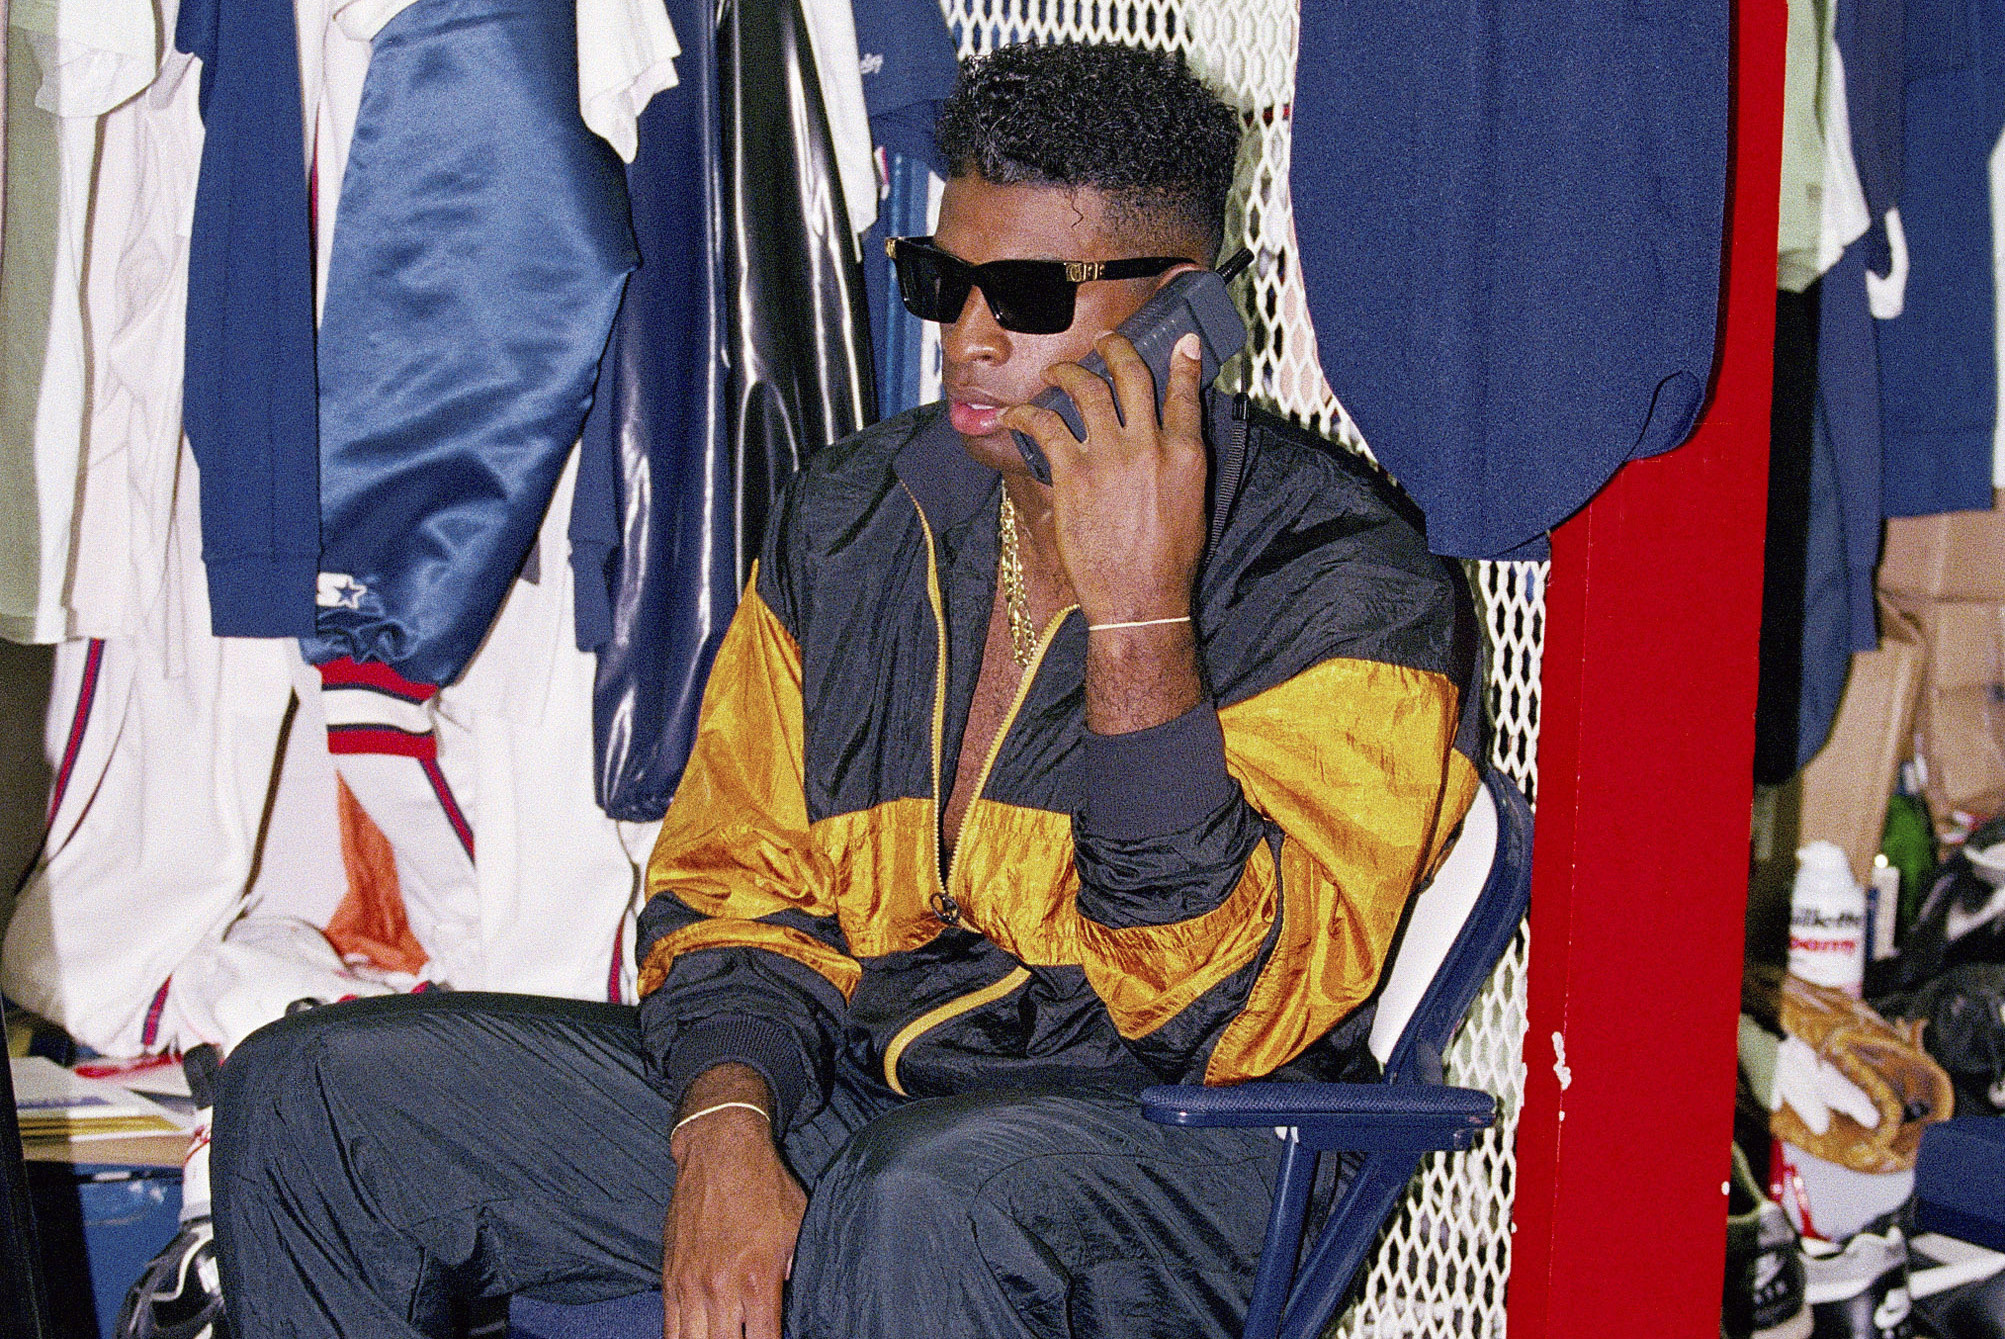 Deion Sanders tried to play two sports in one day